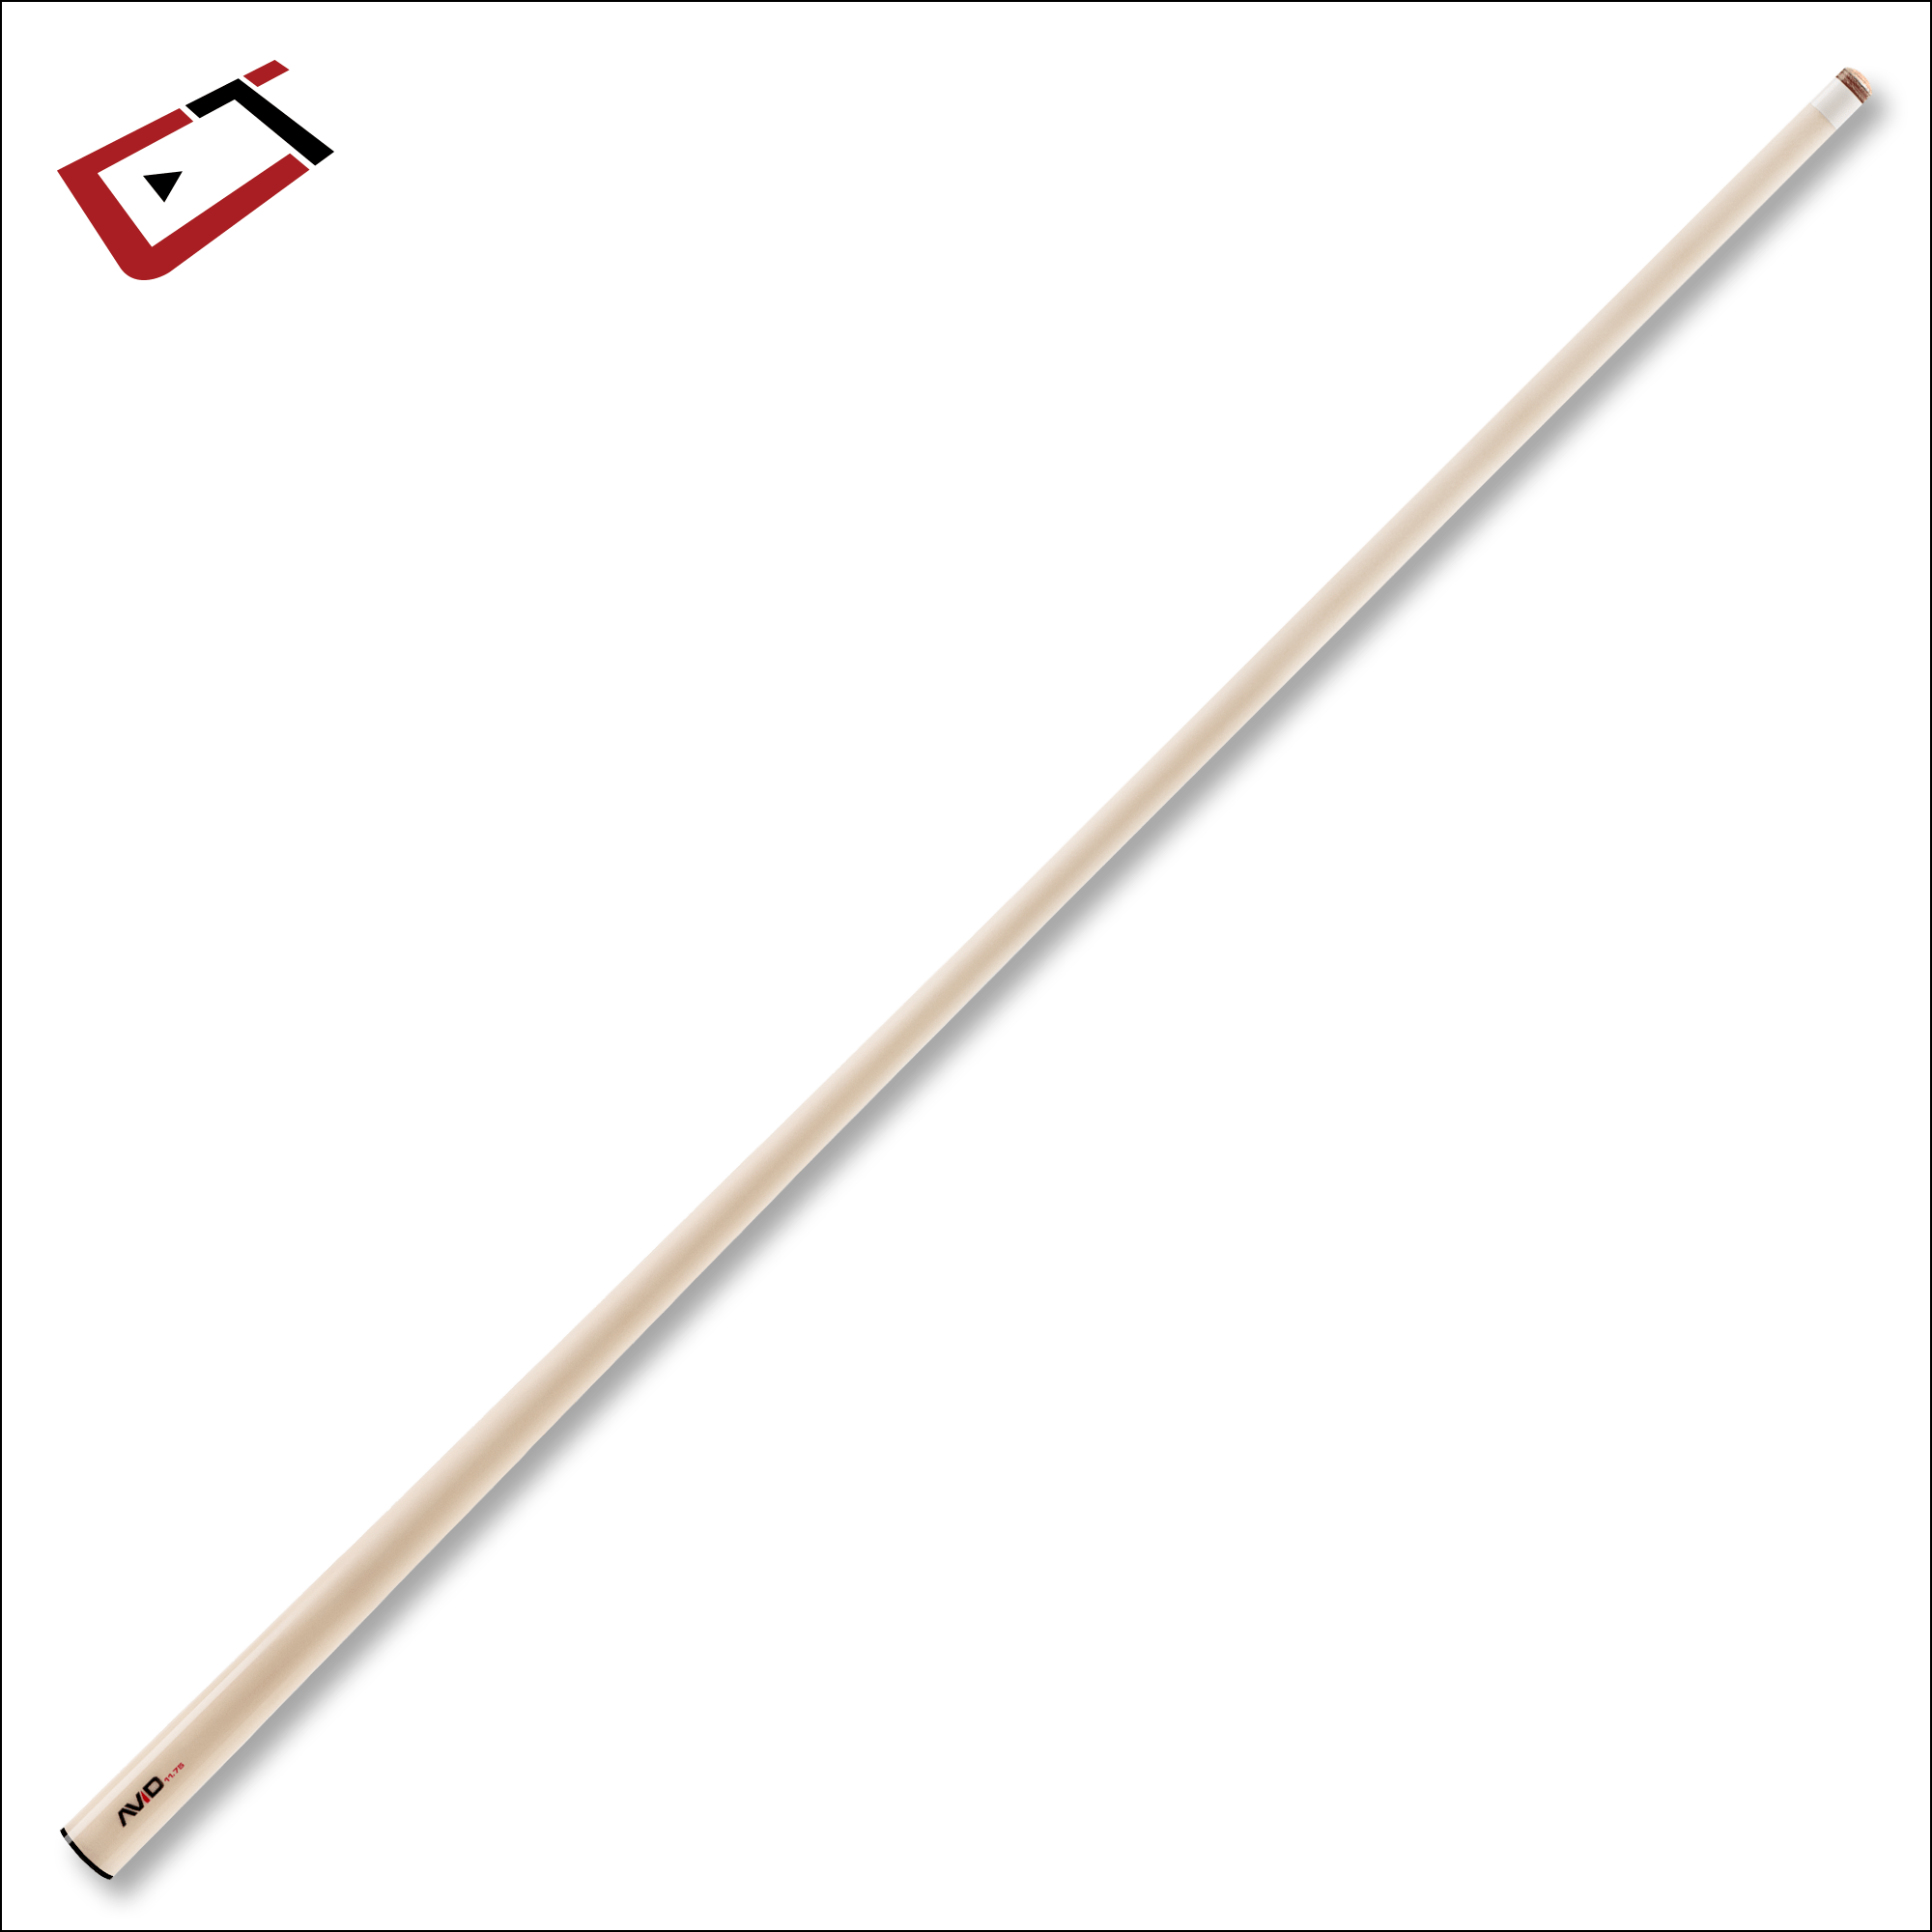 Imperial Pool Cue Imperial - AVID Chroma Currency Cue (12.75 Shaft) - 95-395NW